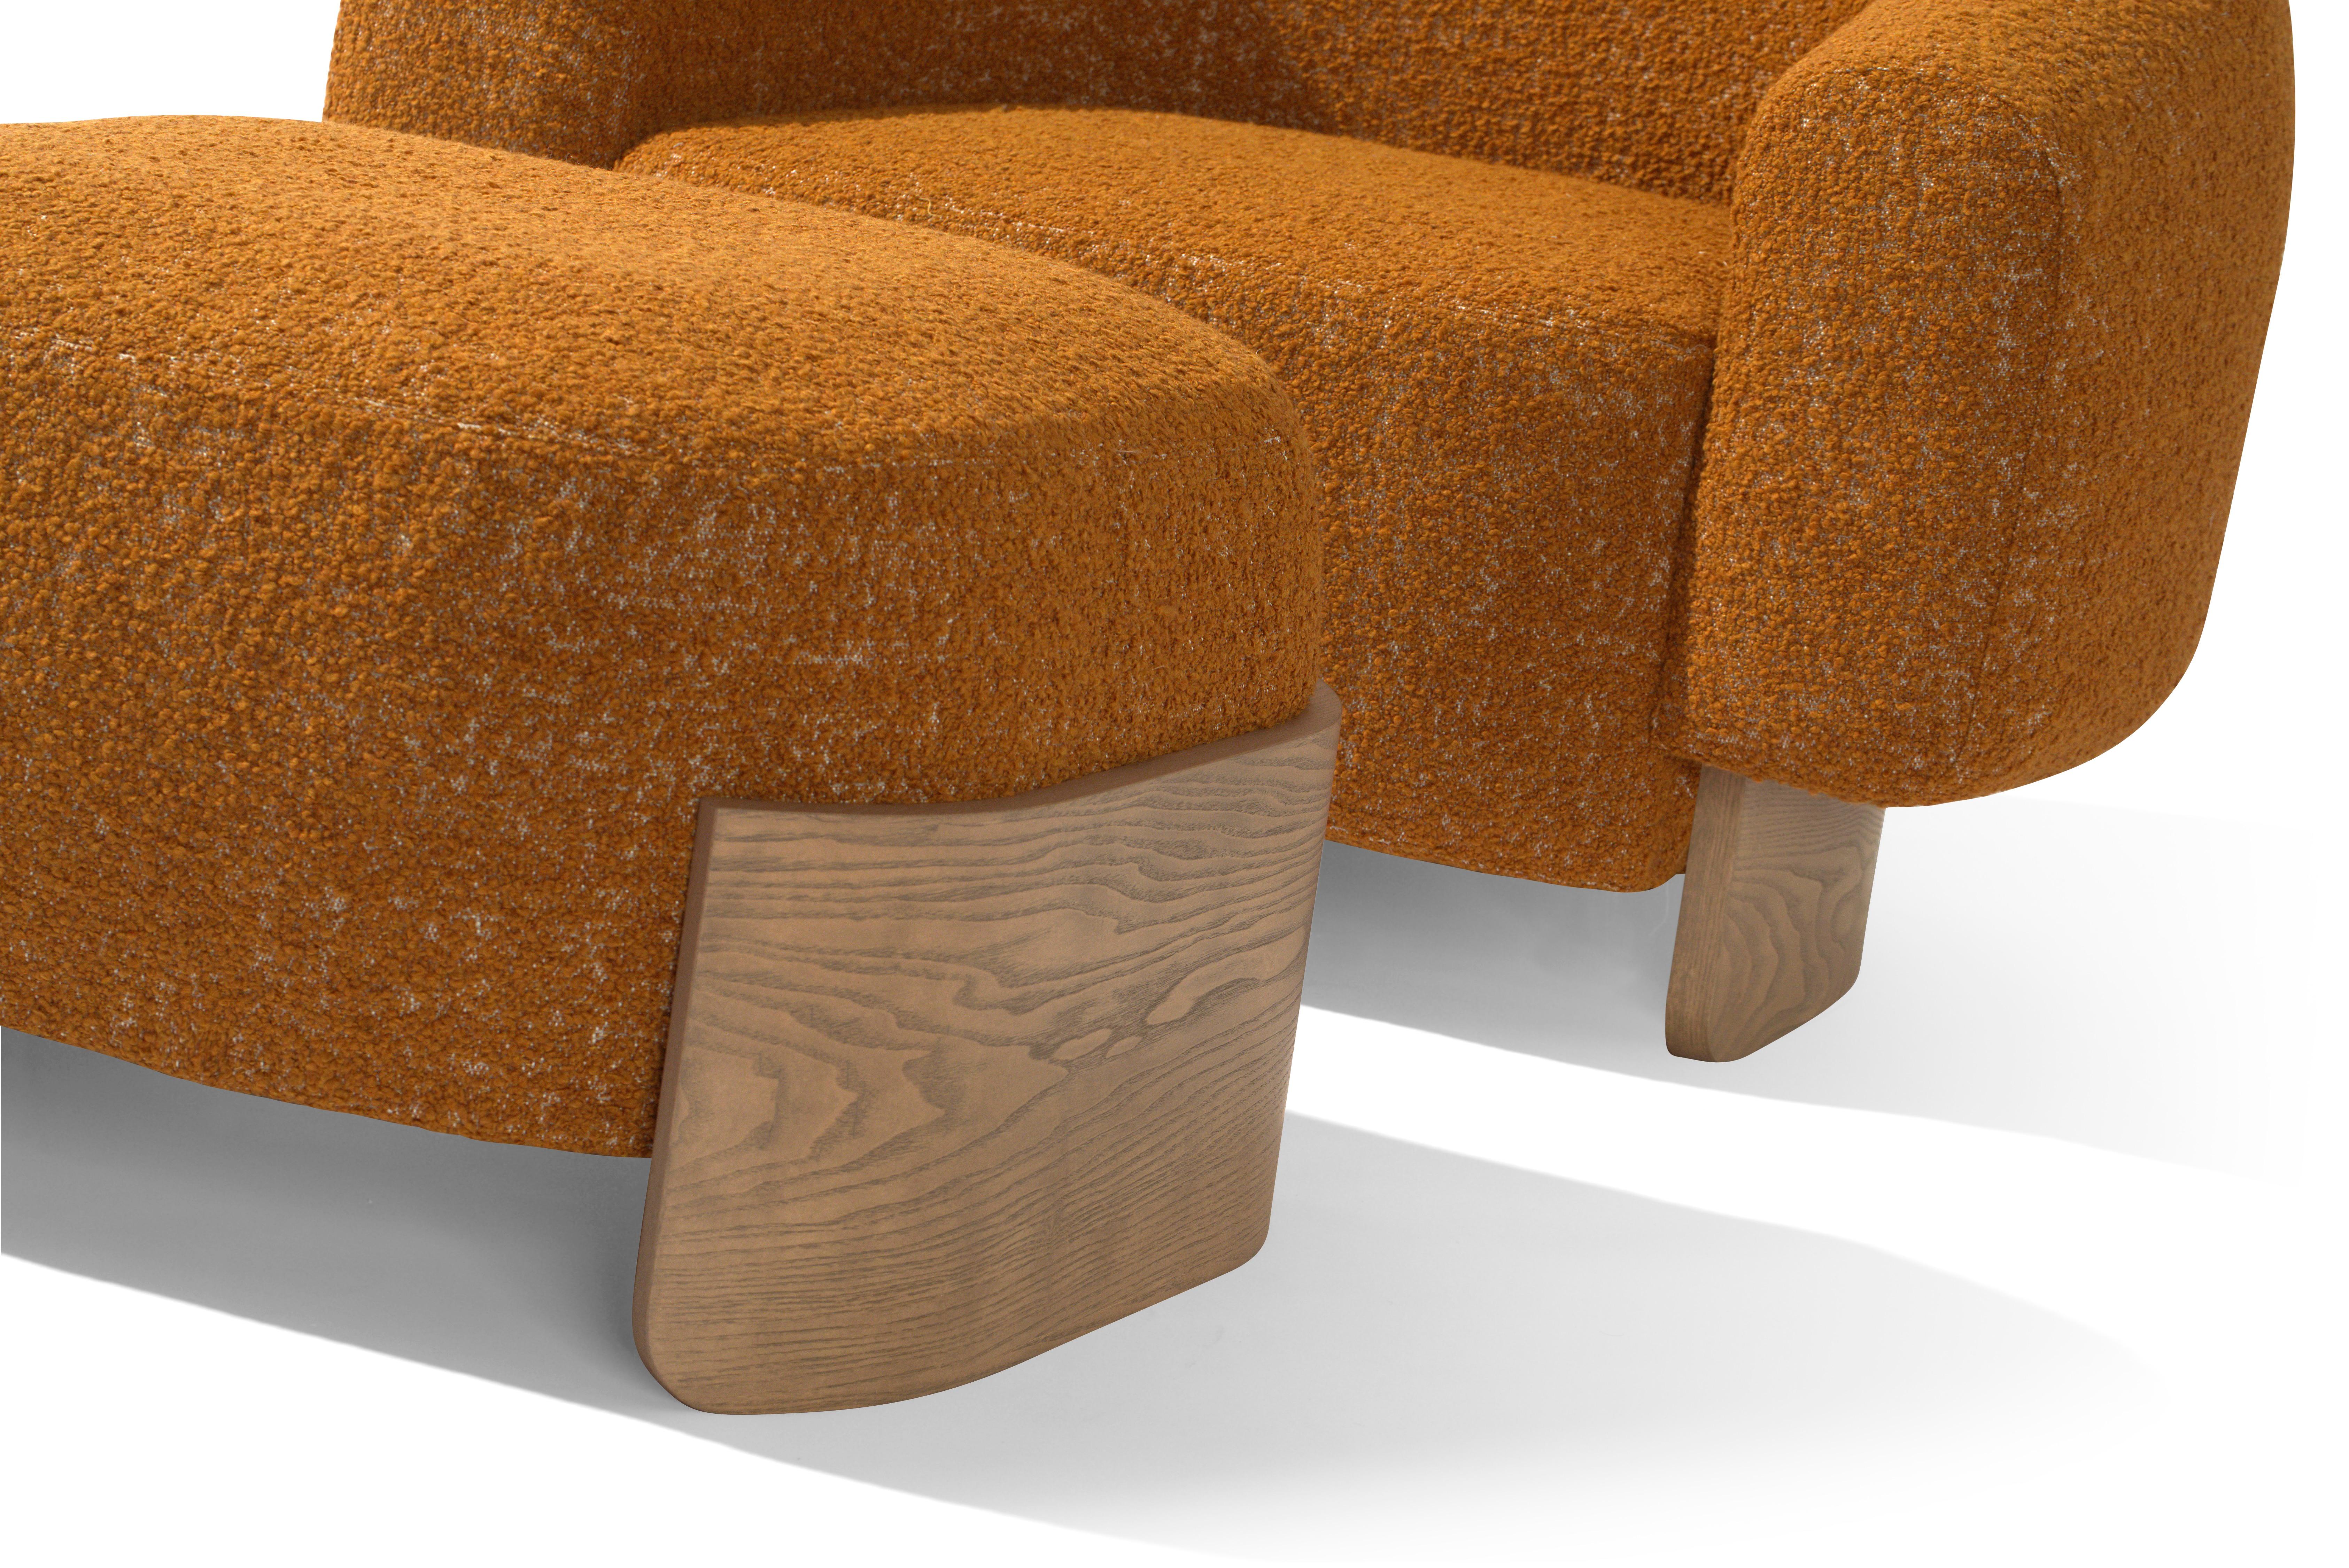 This particular pouff is characterized by a padded seat and two curved ash wood bases which seem to hug the cushion. The peculiarity is undoubtedly found in the new bouclé fabric with which it is upholstered.
Finishing cod. 30 Fango (5 Gloss).
The